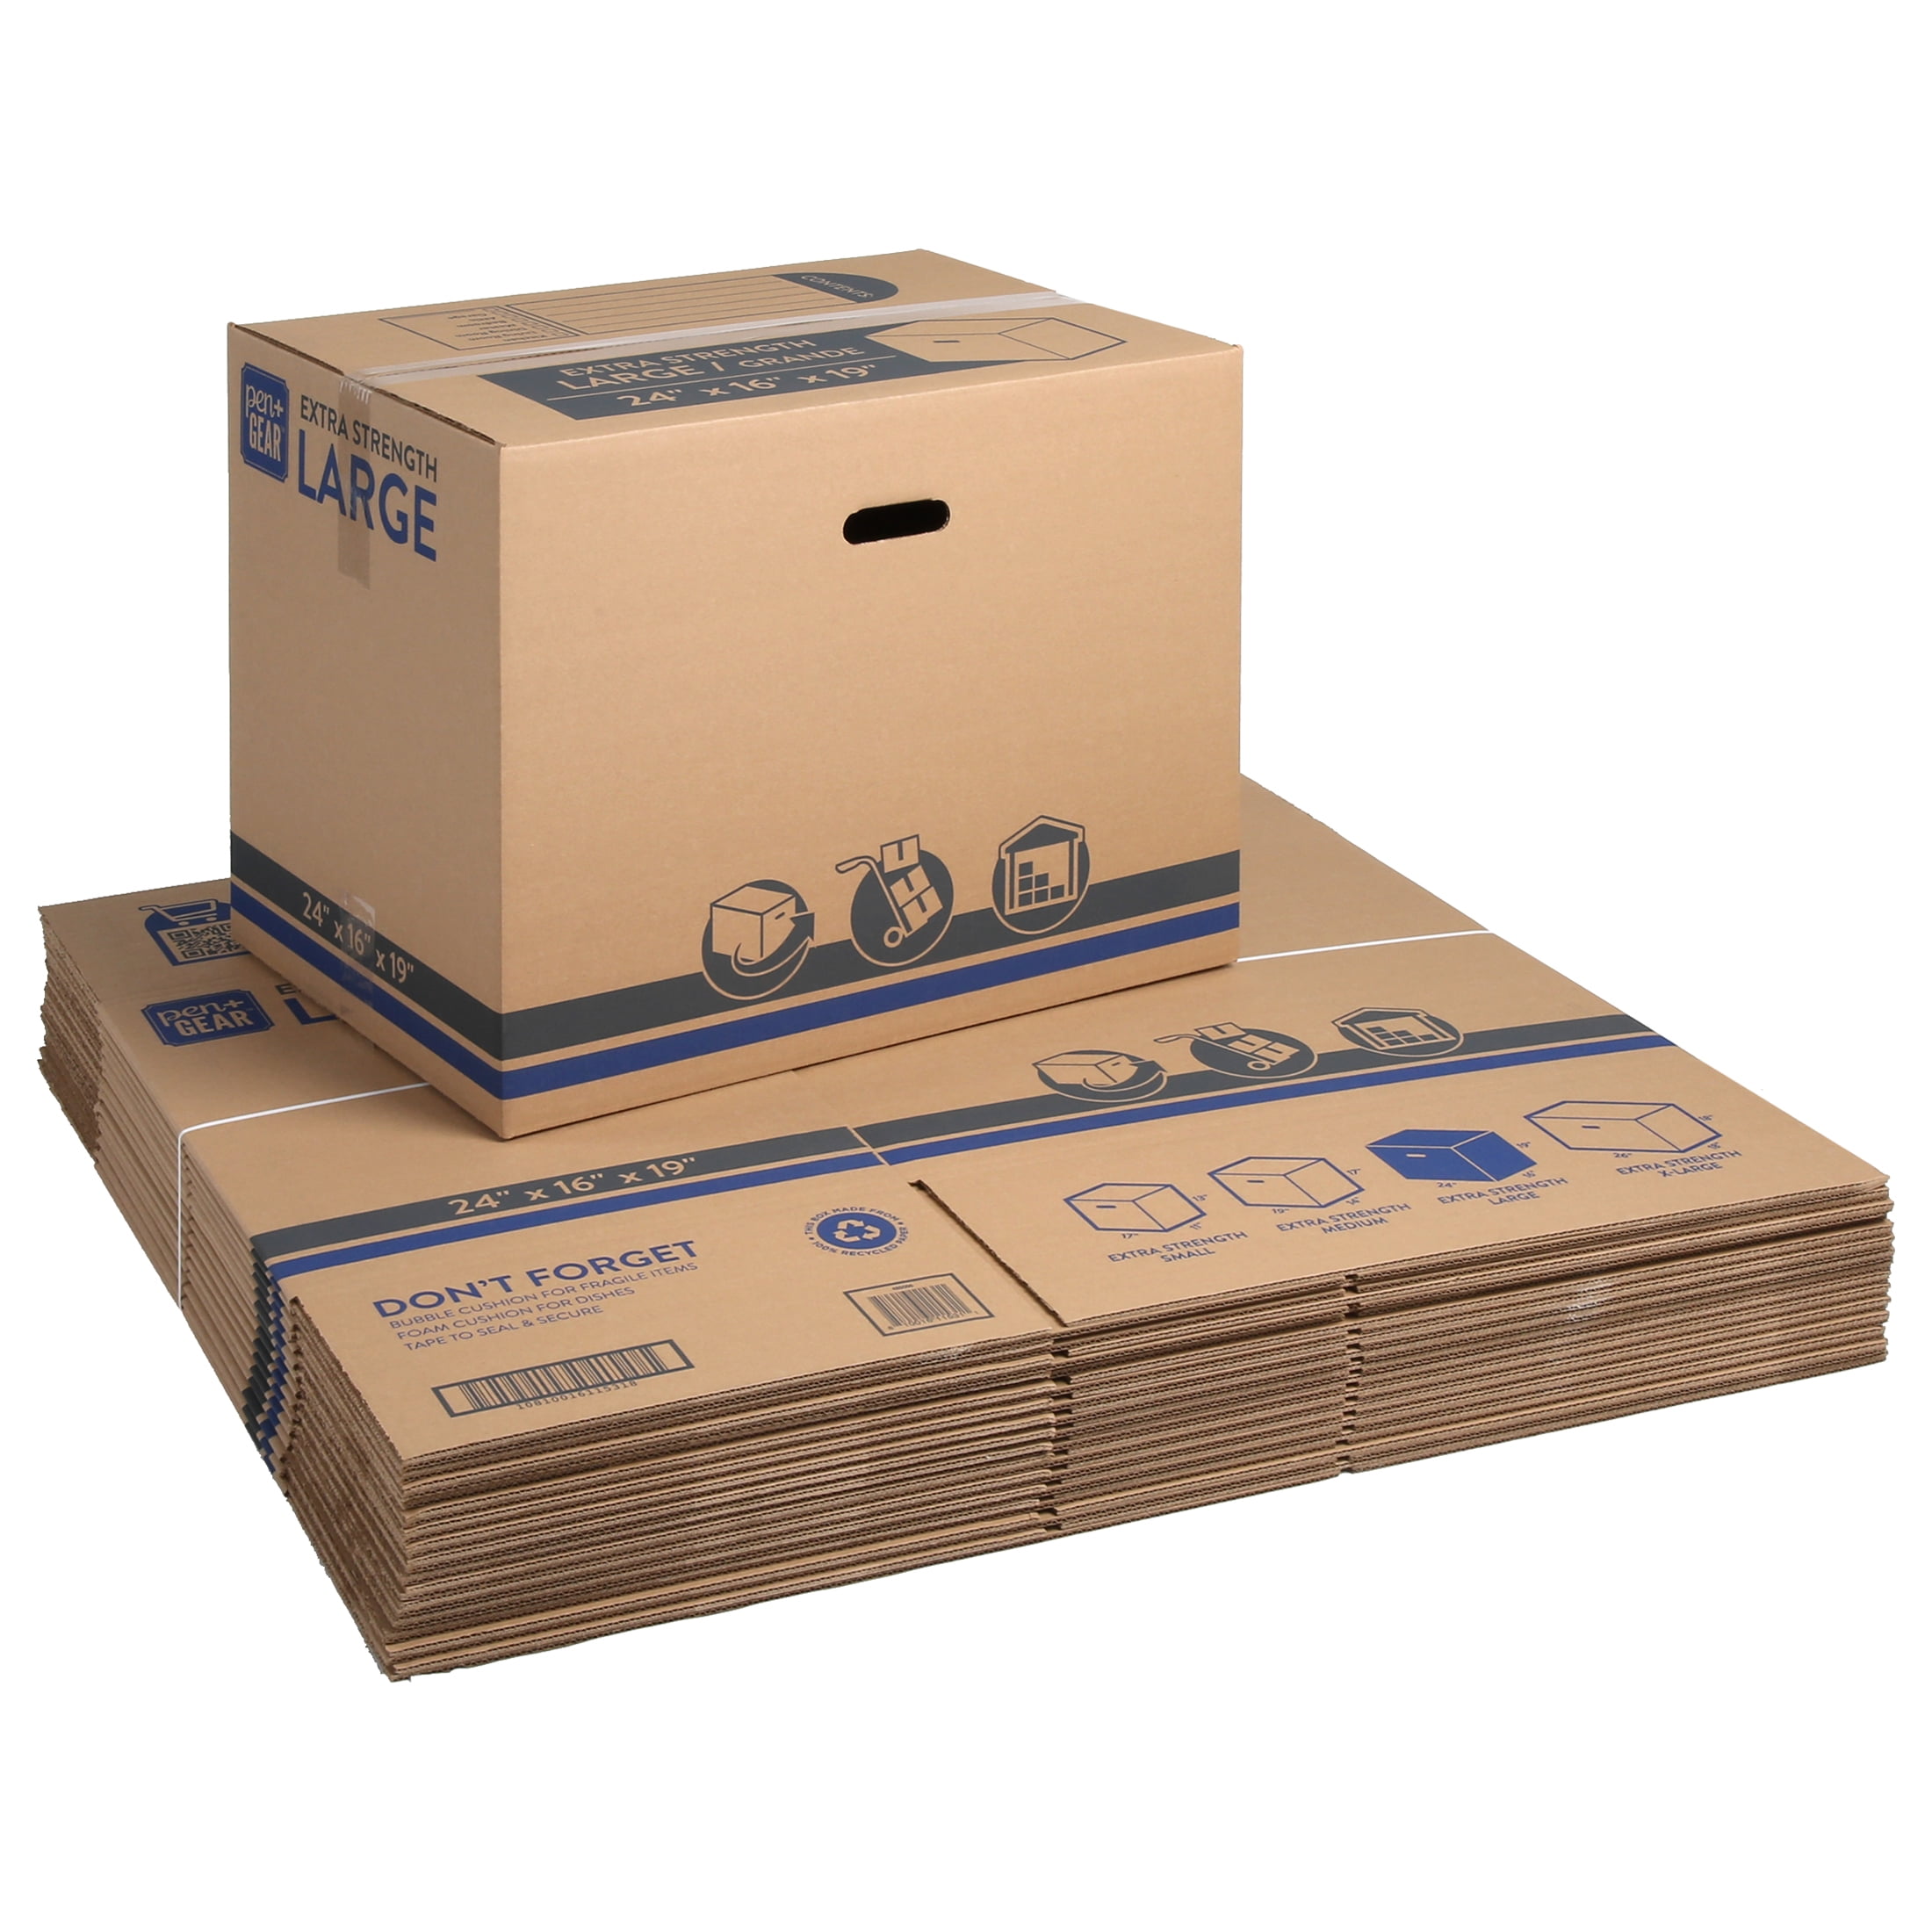 DW Home STRONG DW CARDBOARD BOXES 24"x18"x18"  HOME REMOVAL STORAGE PACKING CARTONS 